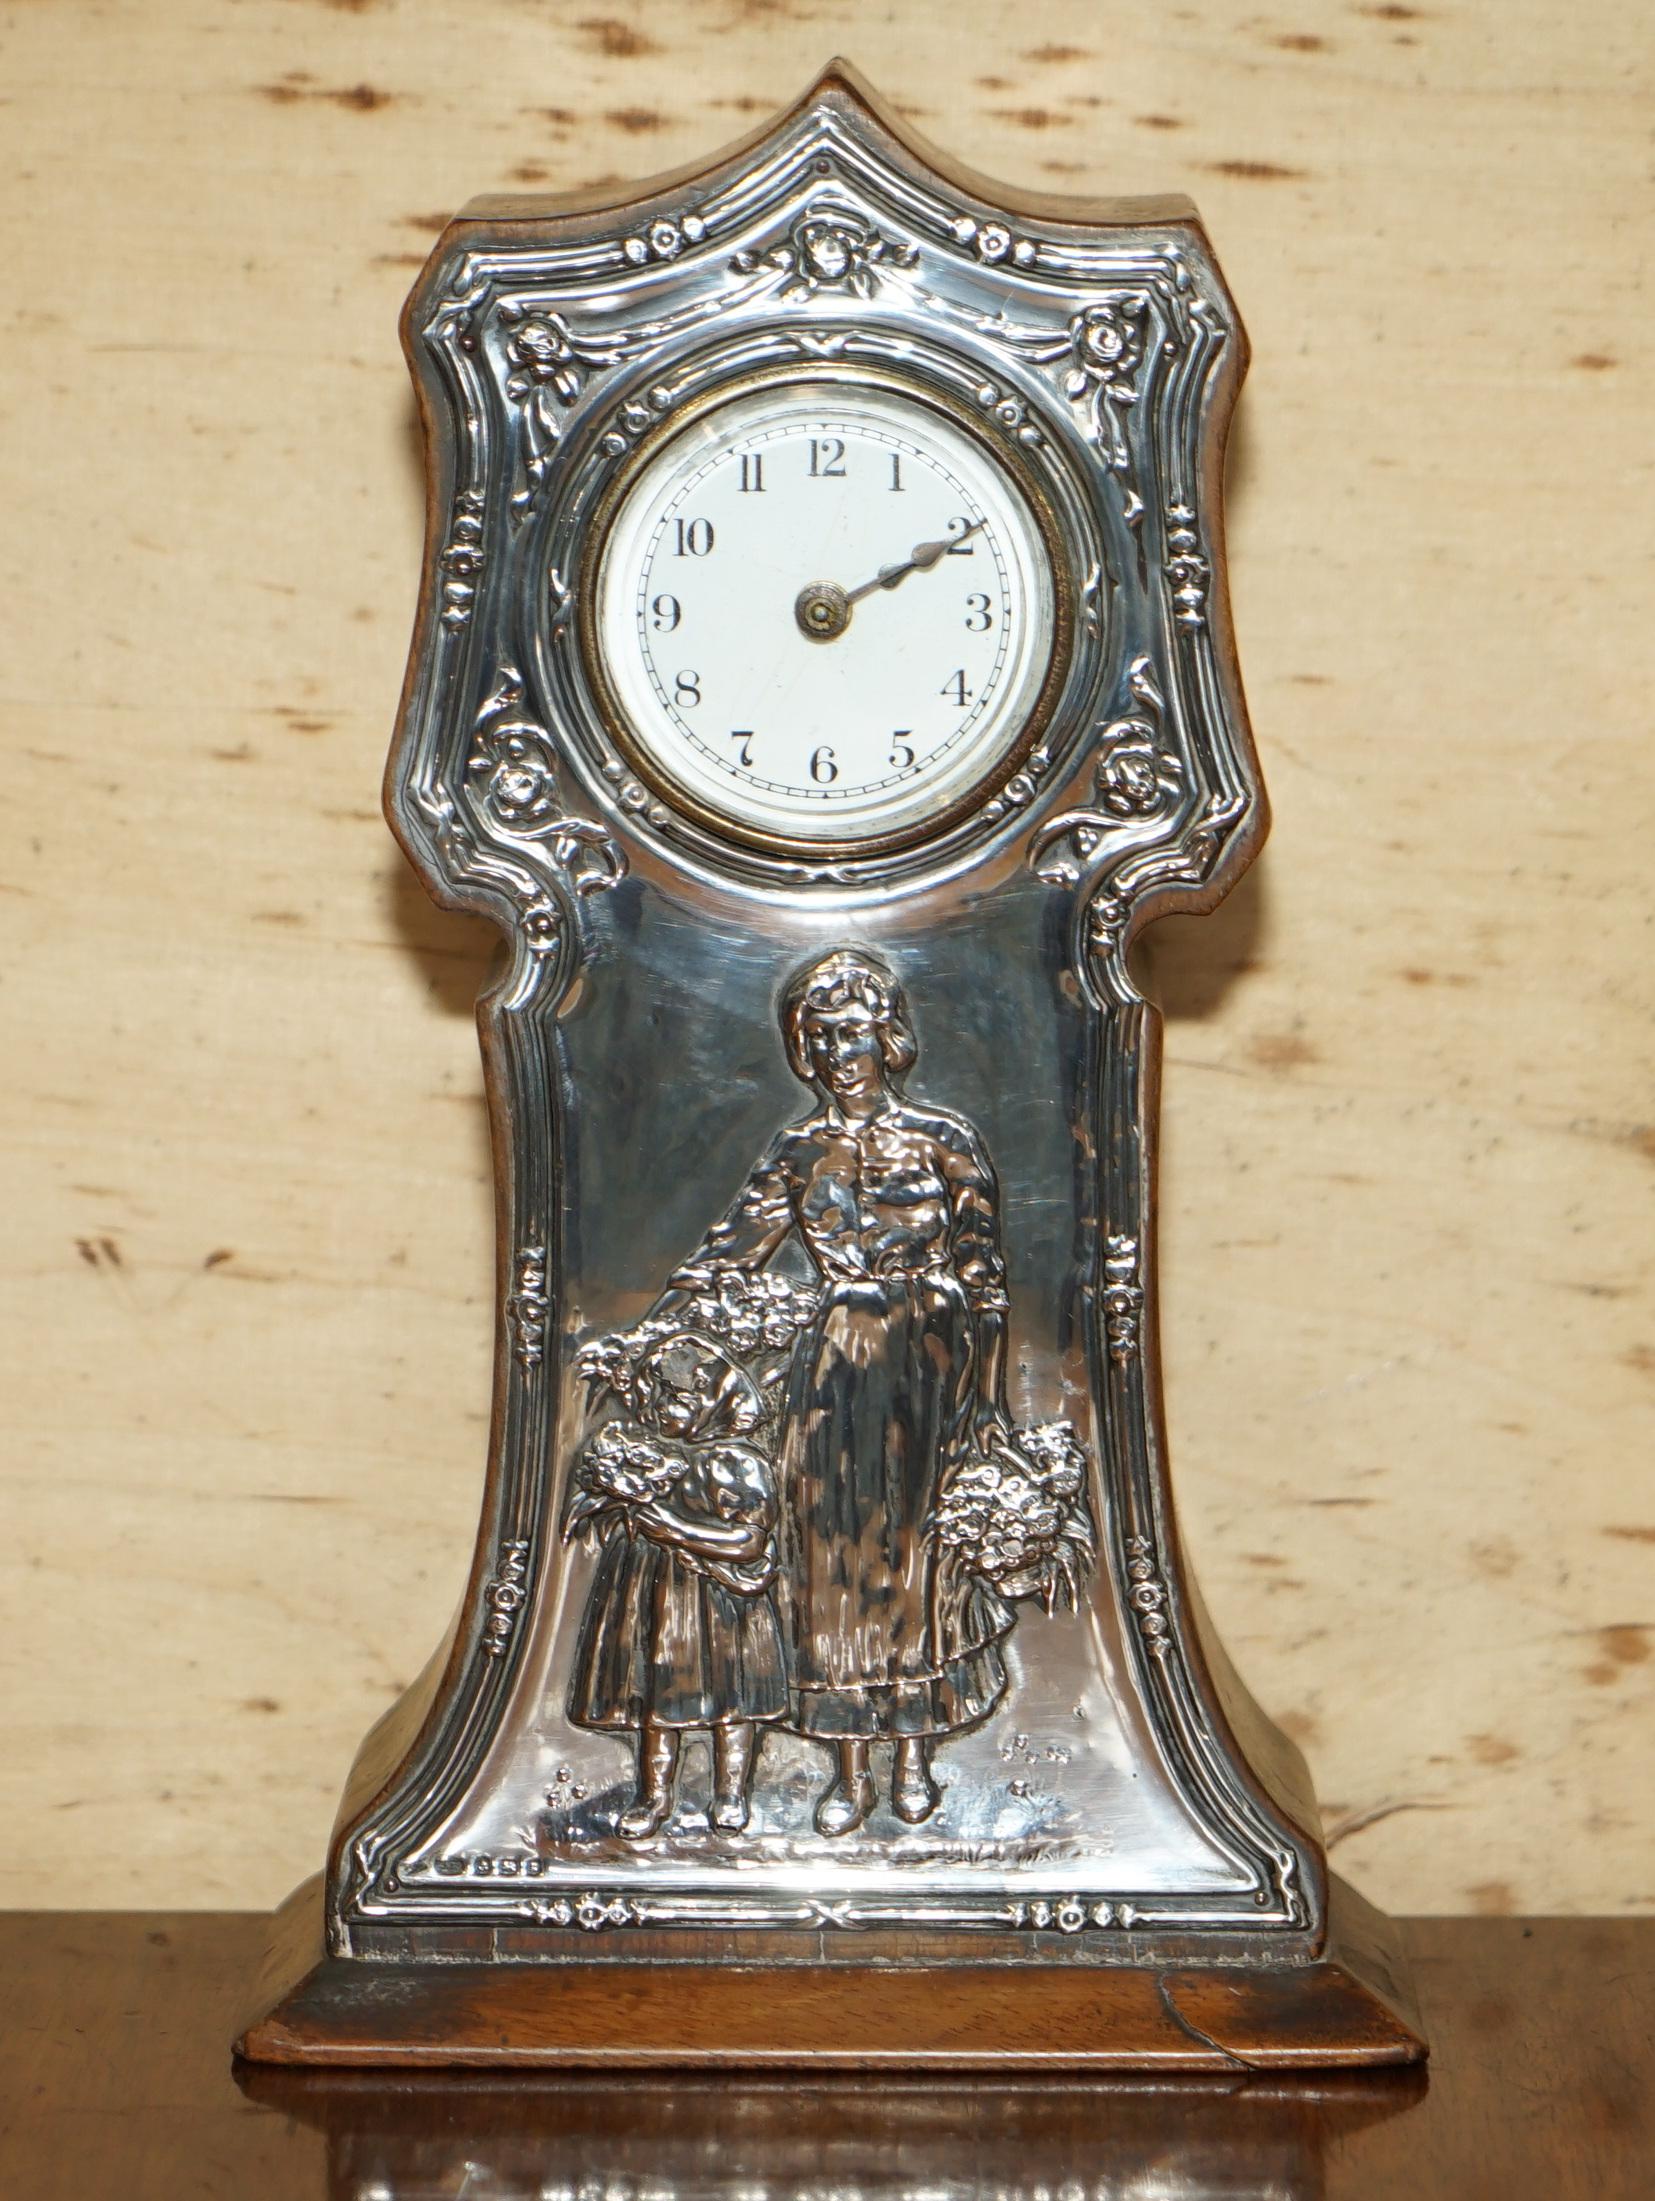 We are delighted to offer for sale this fully hallmarked 1906 Birmingham made Sterling Silver mantle clock depicting and mother and child

This clock is in totally original condition, apart from some silver polish it is untouched. It has all the